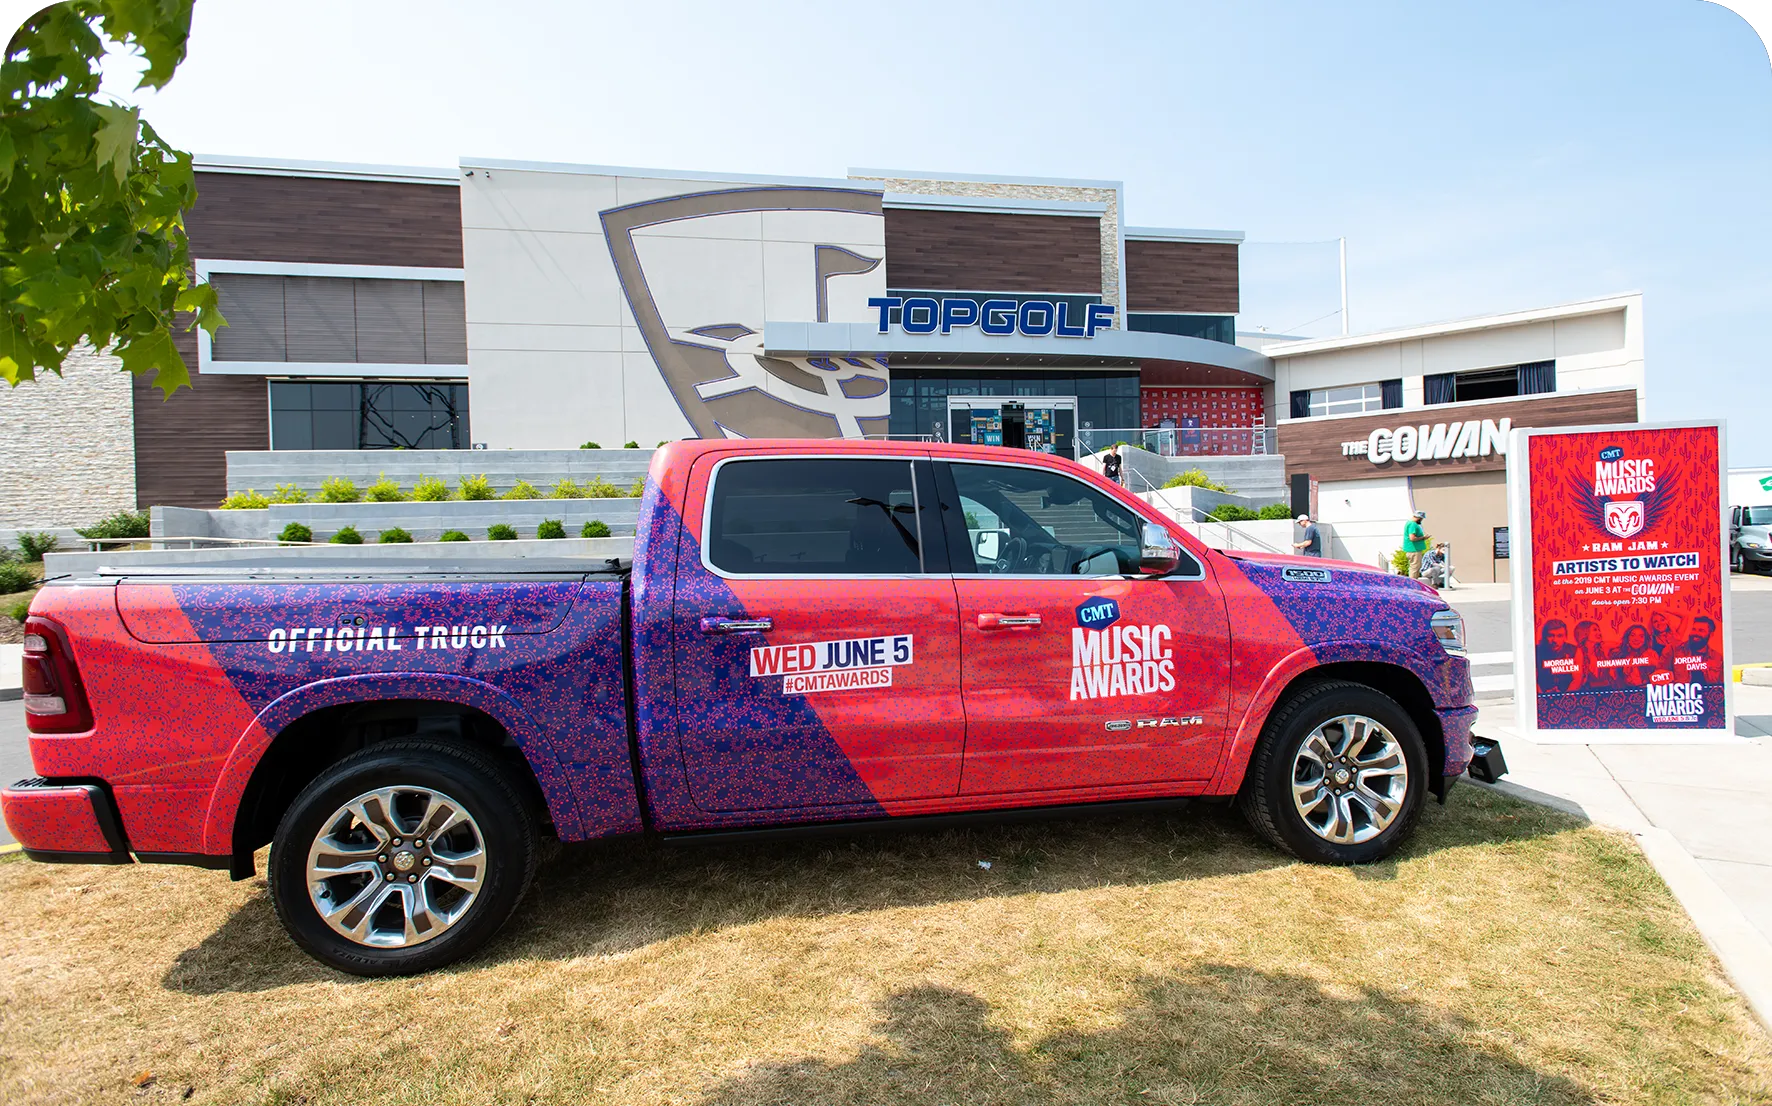 Country Music Television Event at Top Golf Nashville Wrapped Truck in front of building